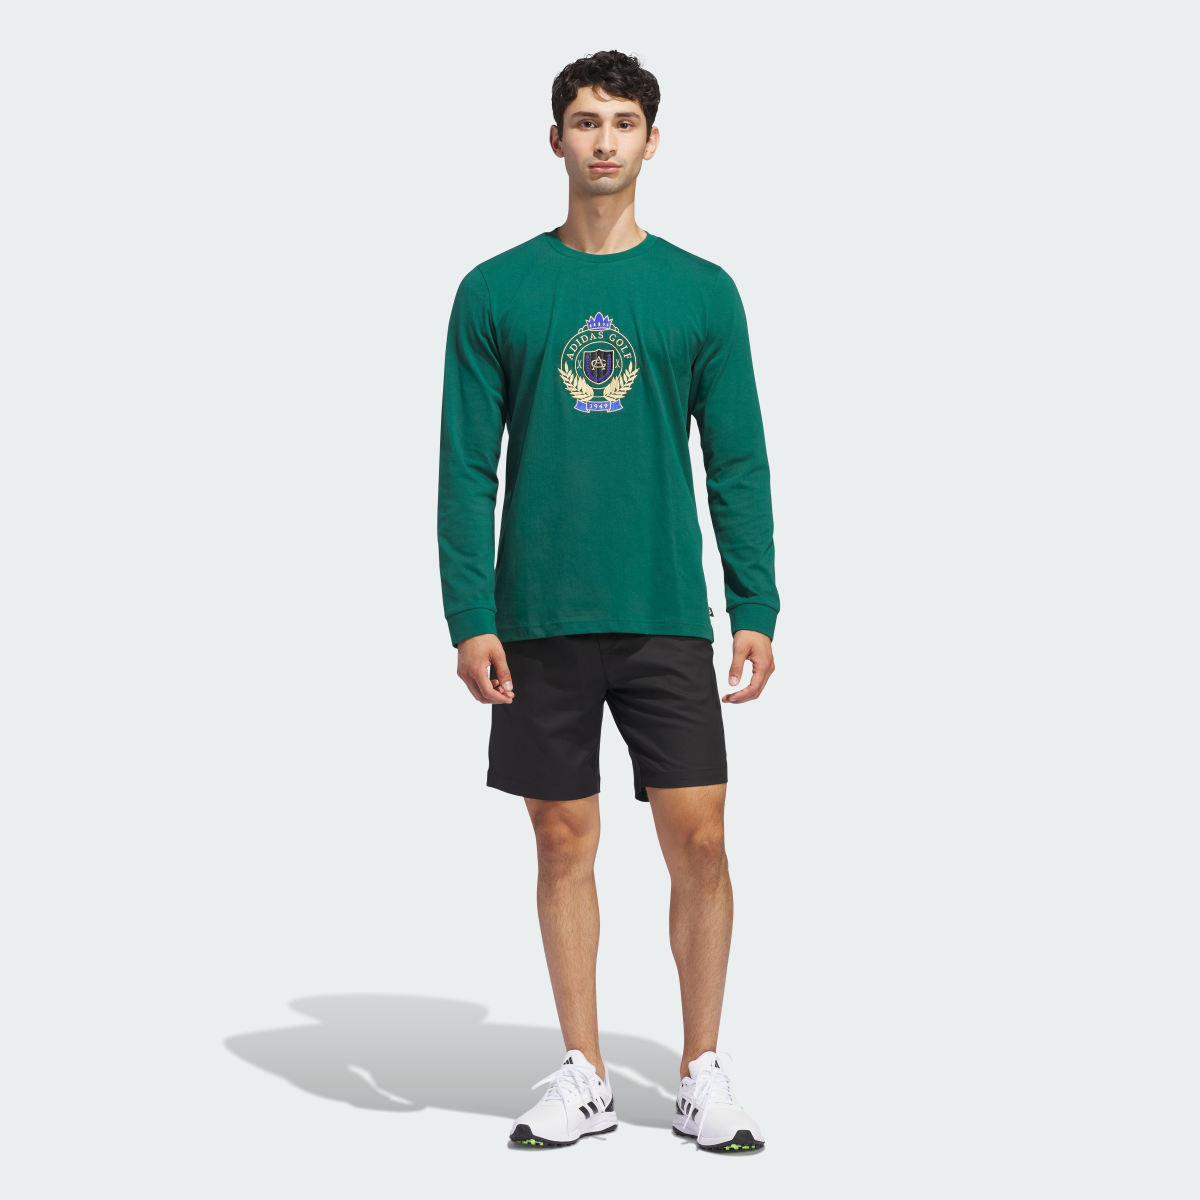 Adidas Go-To Crest Graphic Long Sleeve Tee. 8